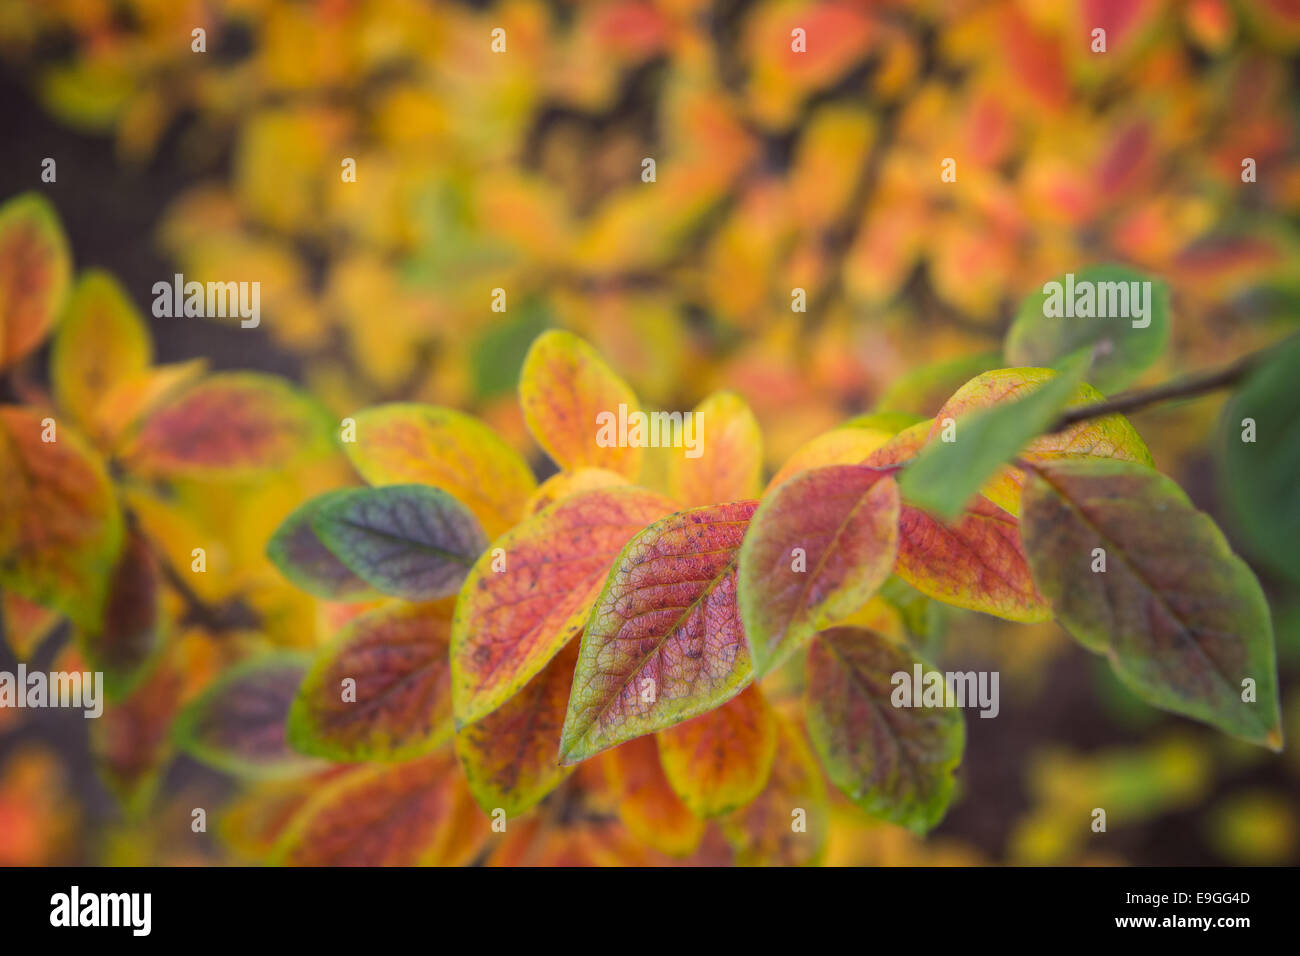 Closeup of leaves of Hedge cotoneaster (or Shiny cotoneaster) (Cotoneaster lucidus) shrub in autumn colors Stock Photo